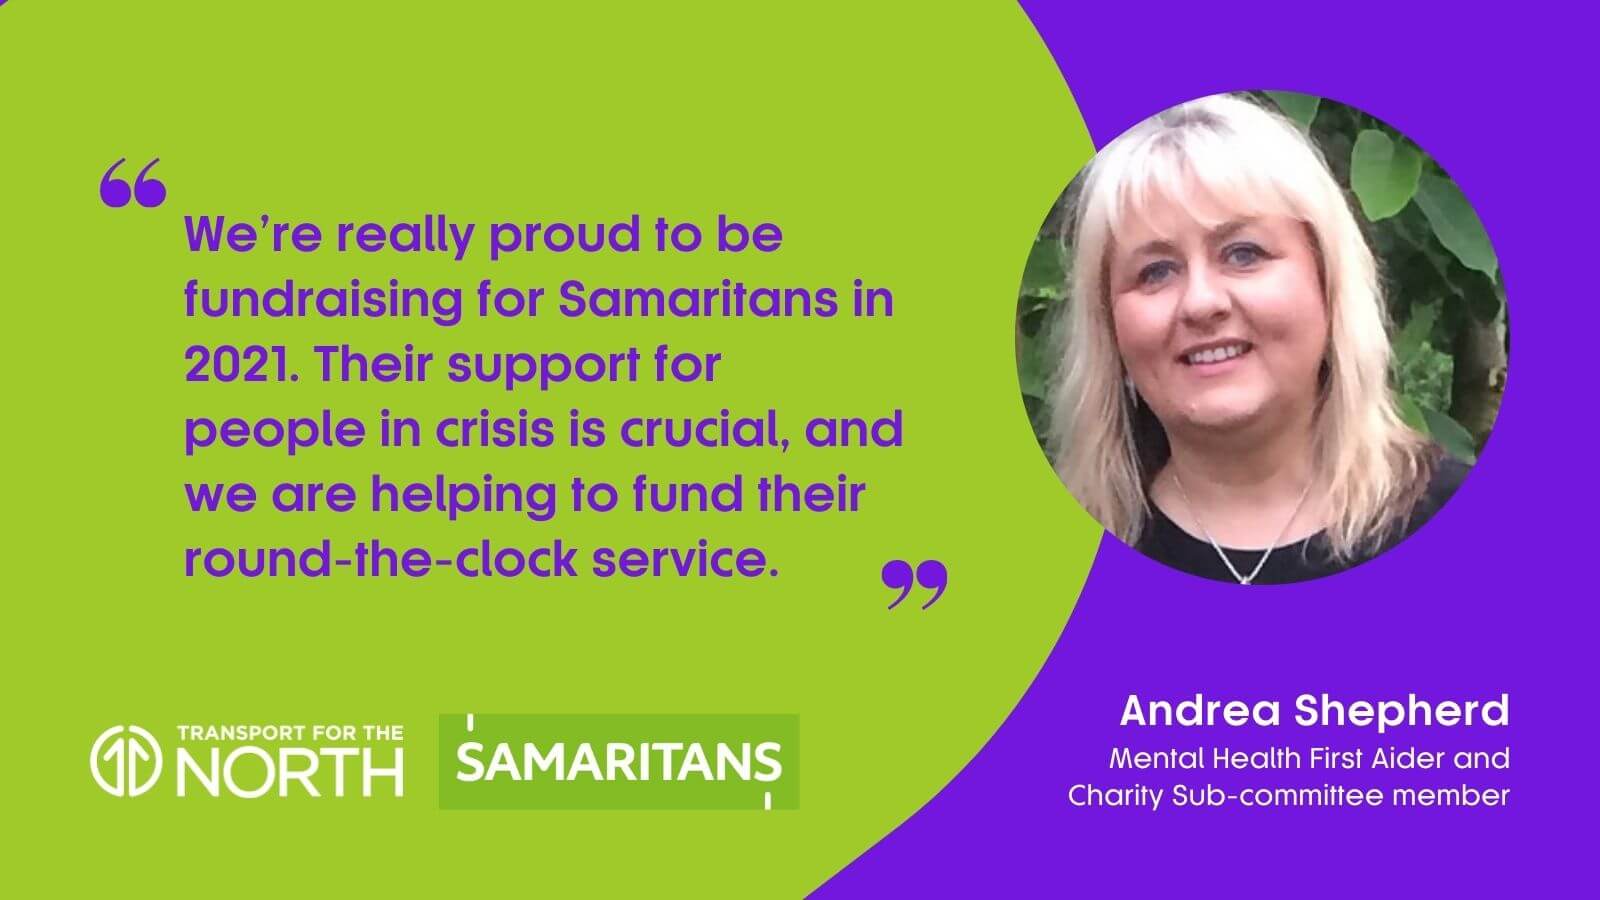 Andrea Shepherd, Mental Health First Aider and member of TfN’s Charity Sub-committee talks about partnership with Samaritans